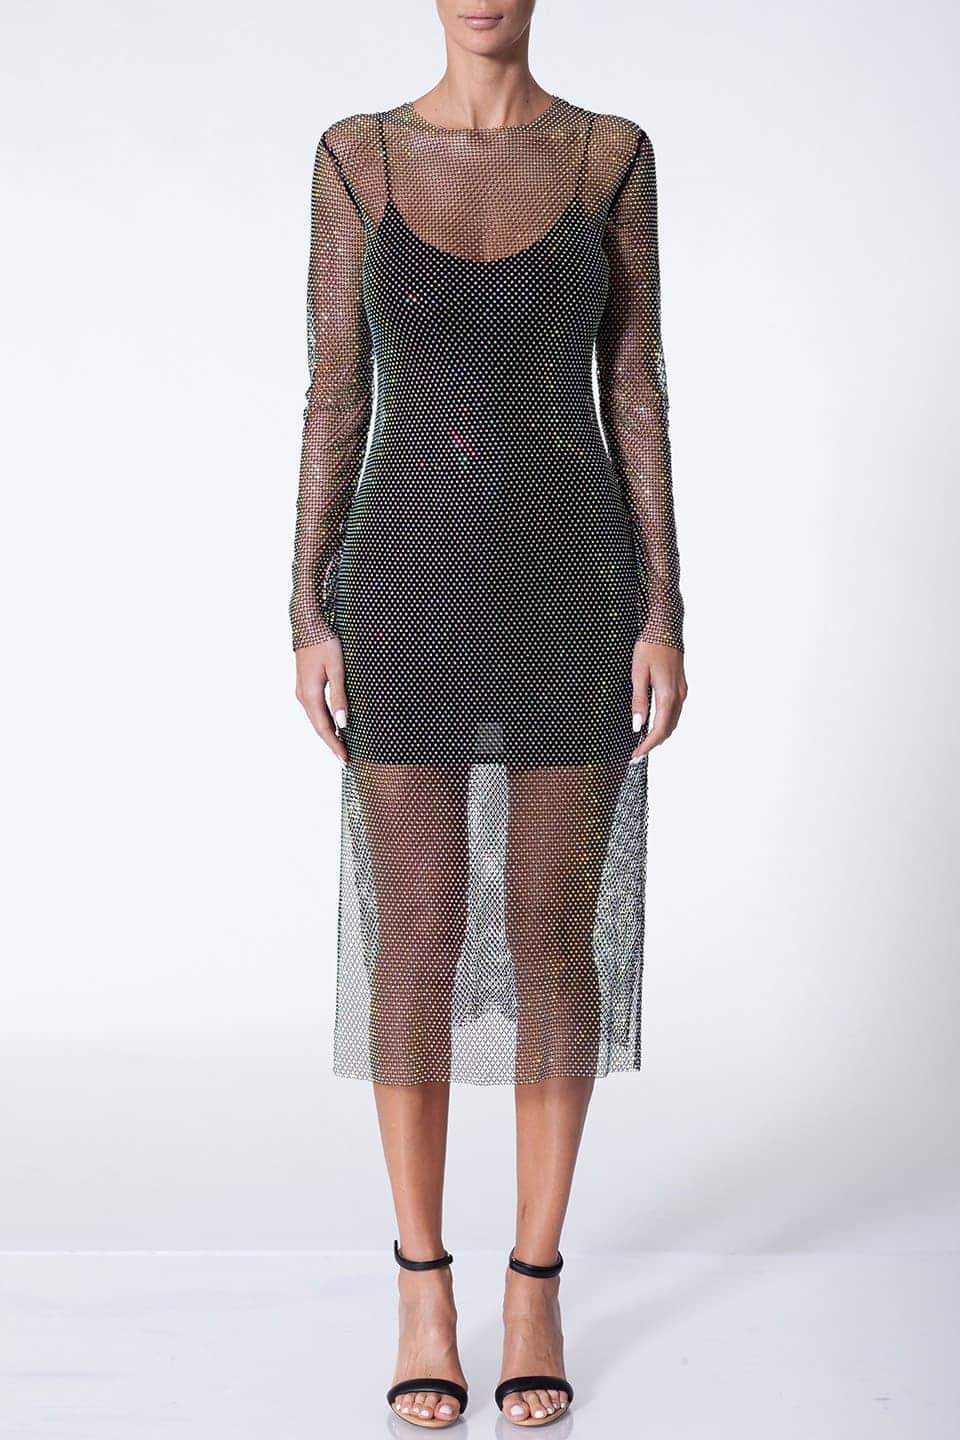 Anze designer's dress crafted from delicate mesh with glittering crystals. Model from front view